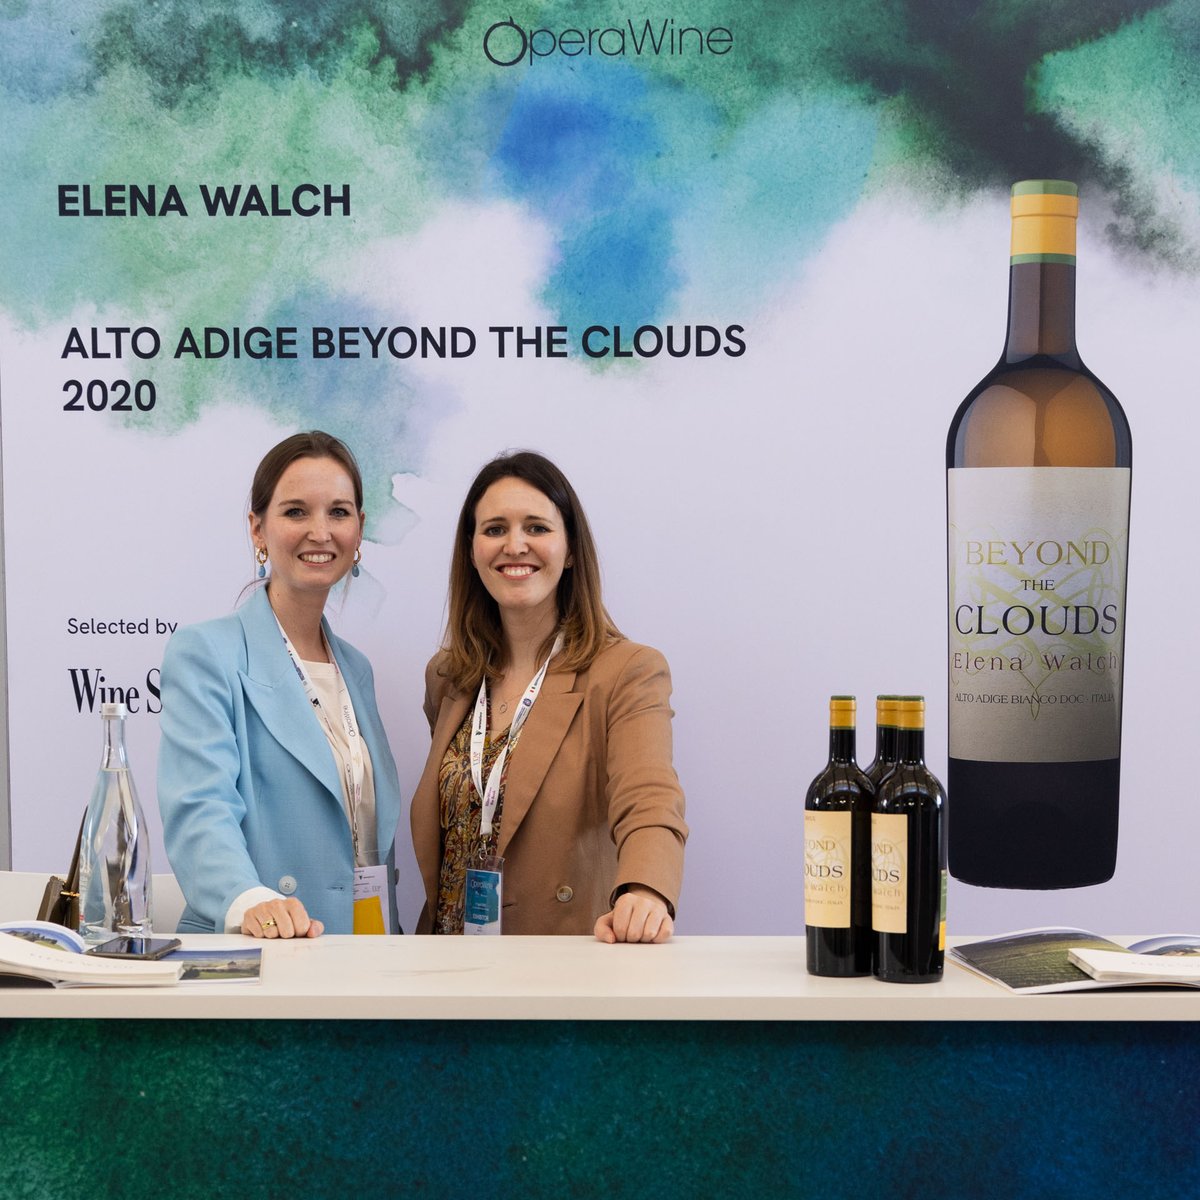 Elena Walch is one of the great Italian producers selected by Wine Spectator for #operawine2023. They presented Alto Adige Beyond the Clouds 2020 during the Grand Tasting. Congratulations! @steviekim222 @VinitalyTasting @pressVRfiere @WineSpectator @ElenaWalch